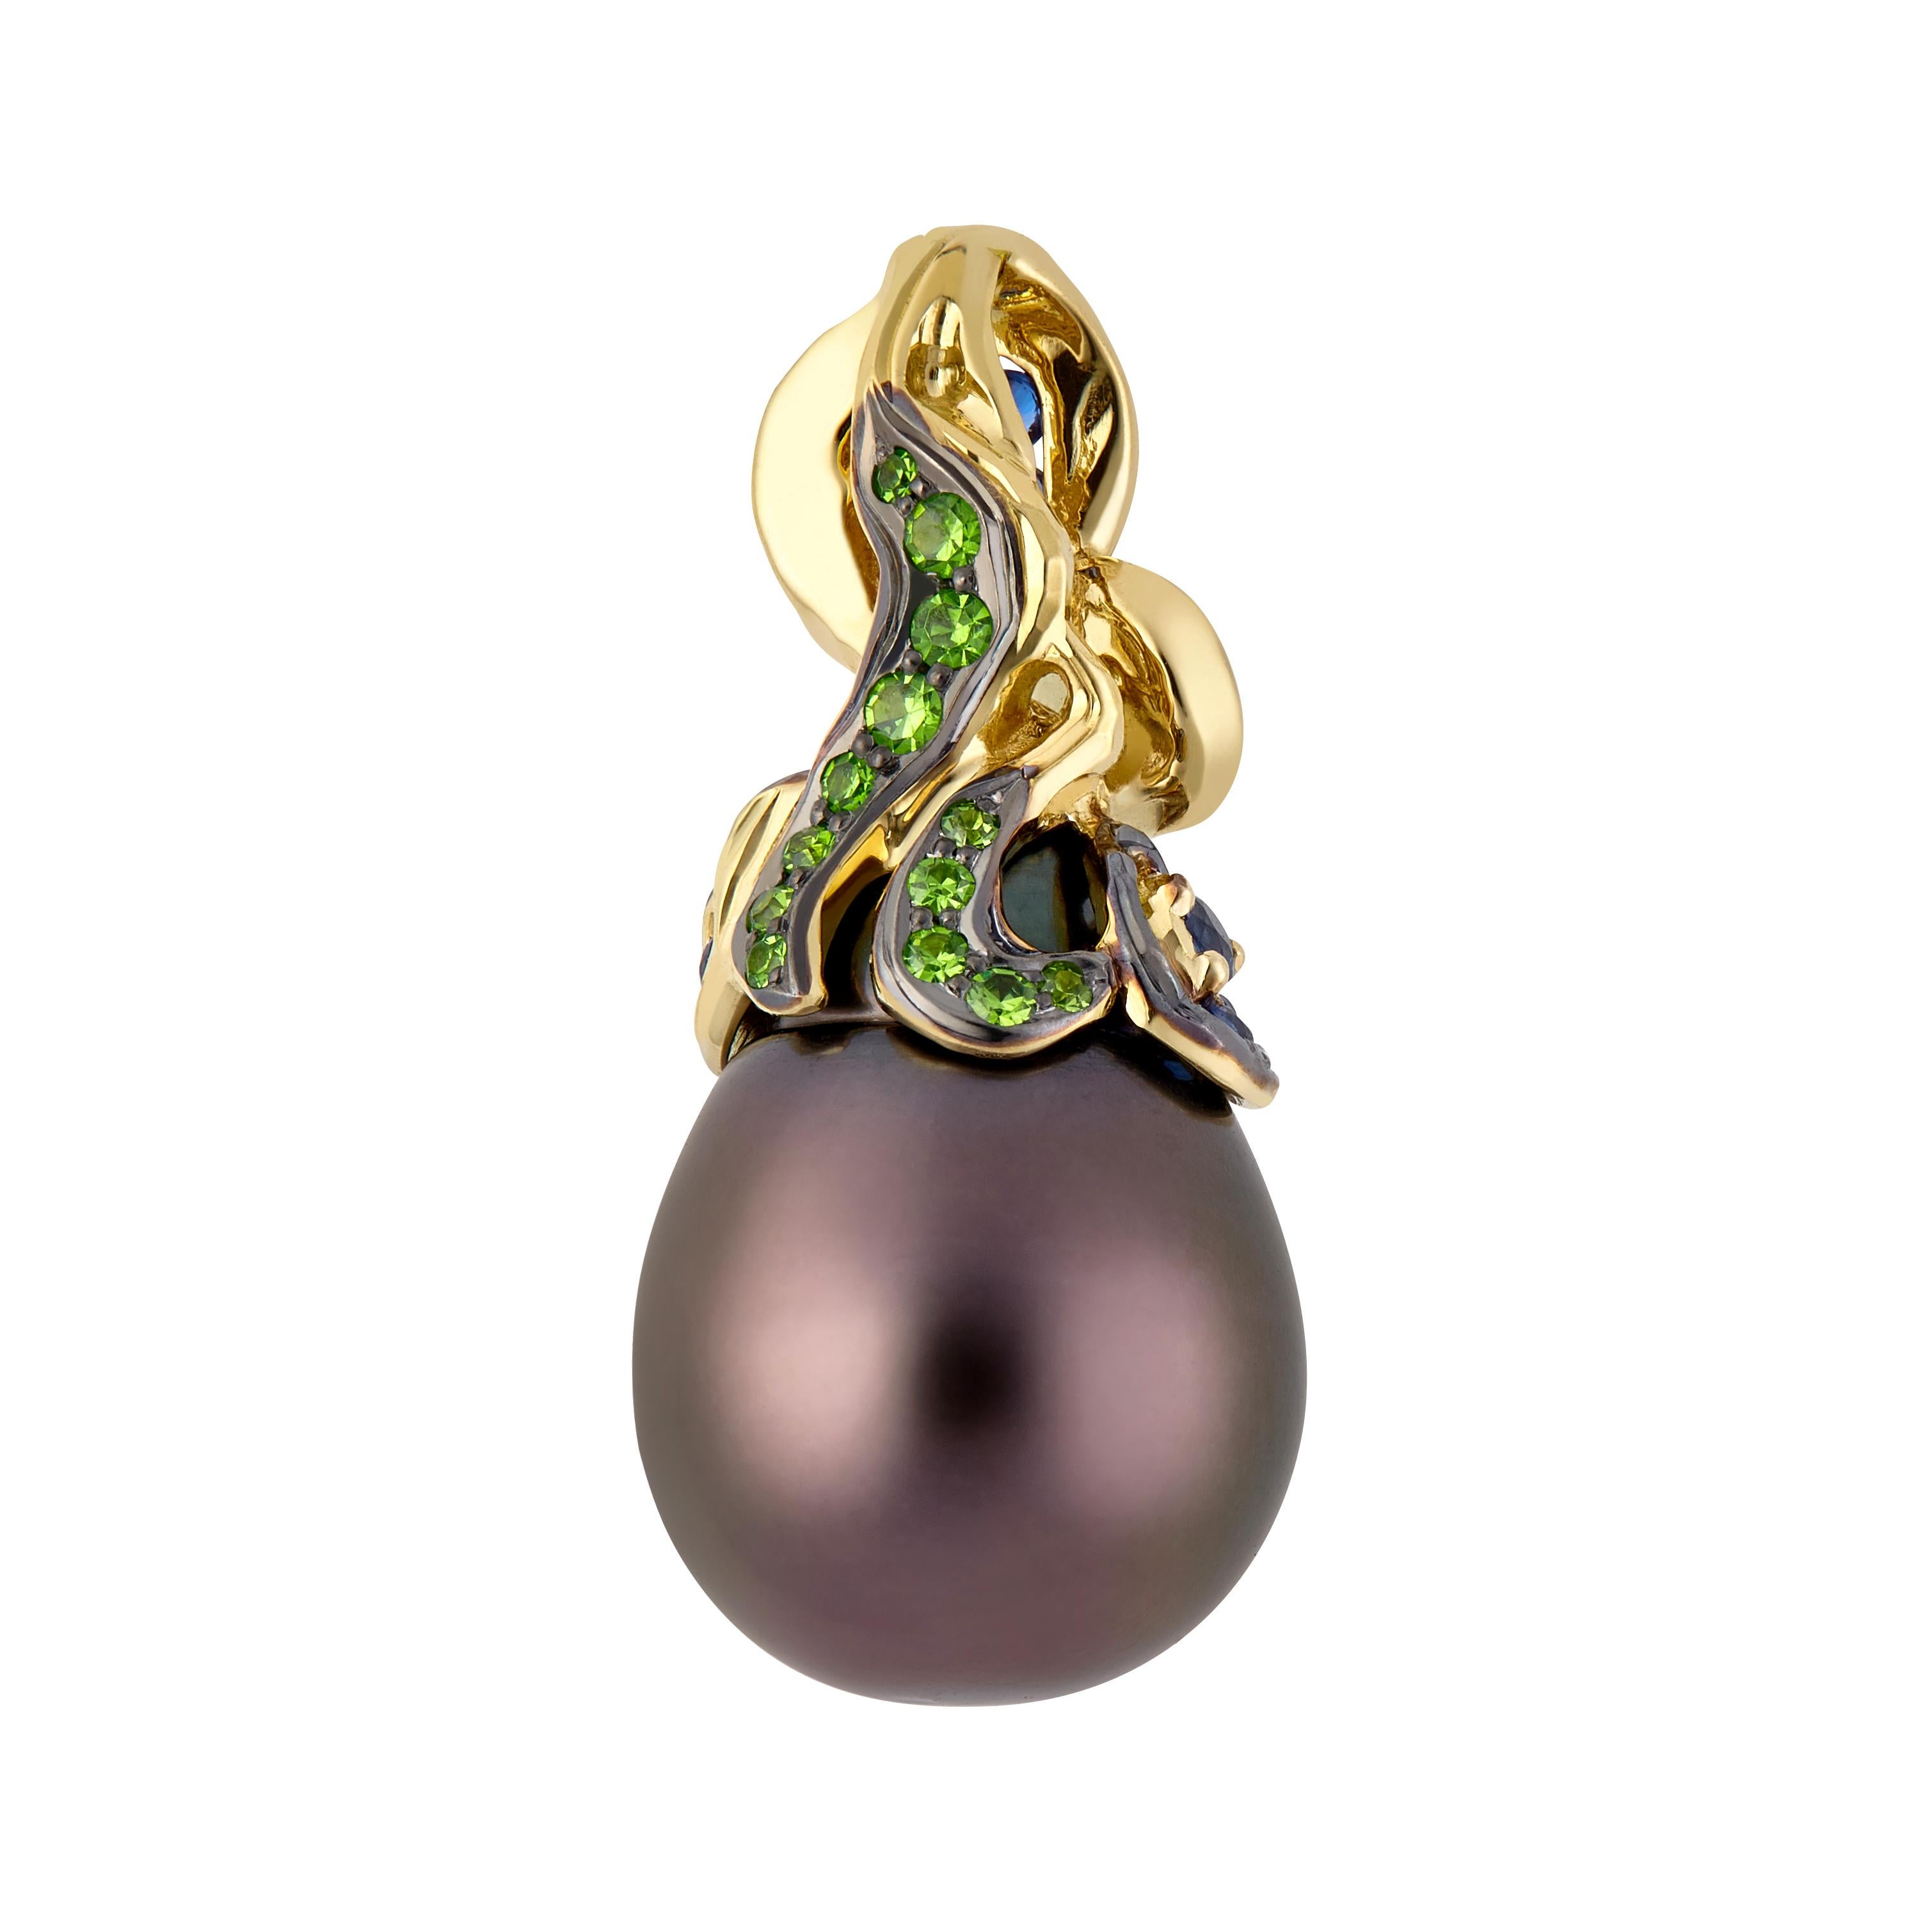 Inspired by impressionism and Vincent Van Gogh, MOISEIKIN created a starry night style pendant with a drop shape Tahitian Pearl, blue sapphires, and rare demantoid garnets. The gold bail with a swirling cloud motif is decorated with radiant blue